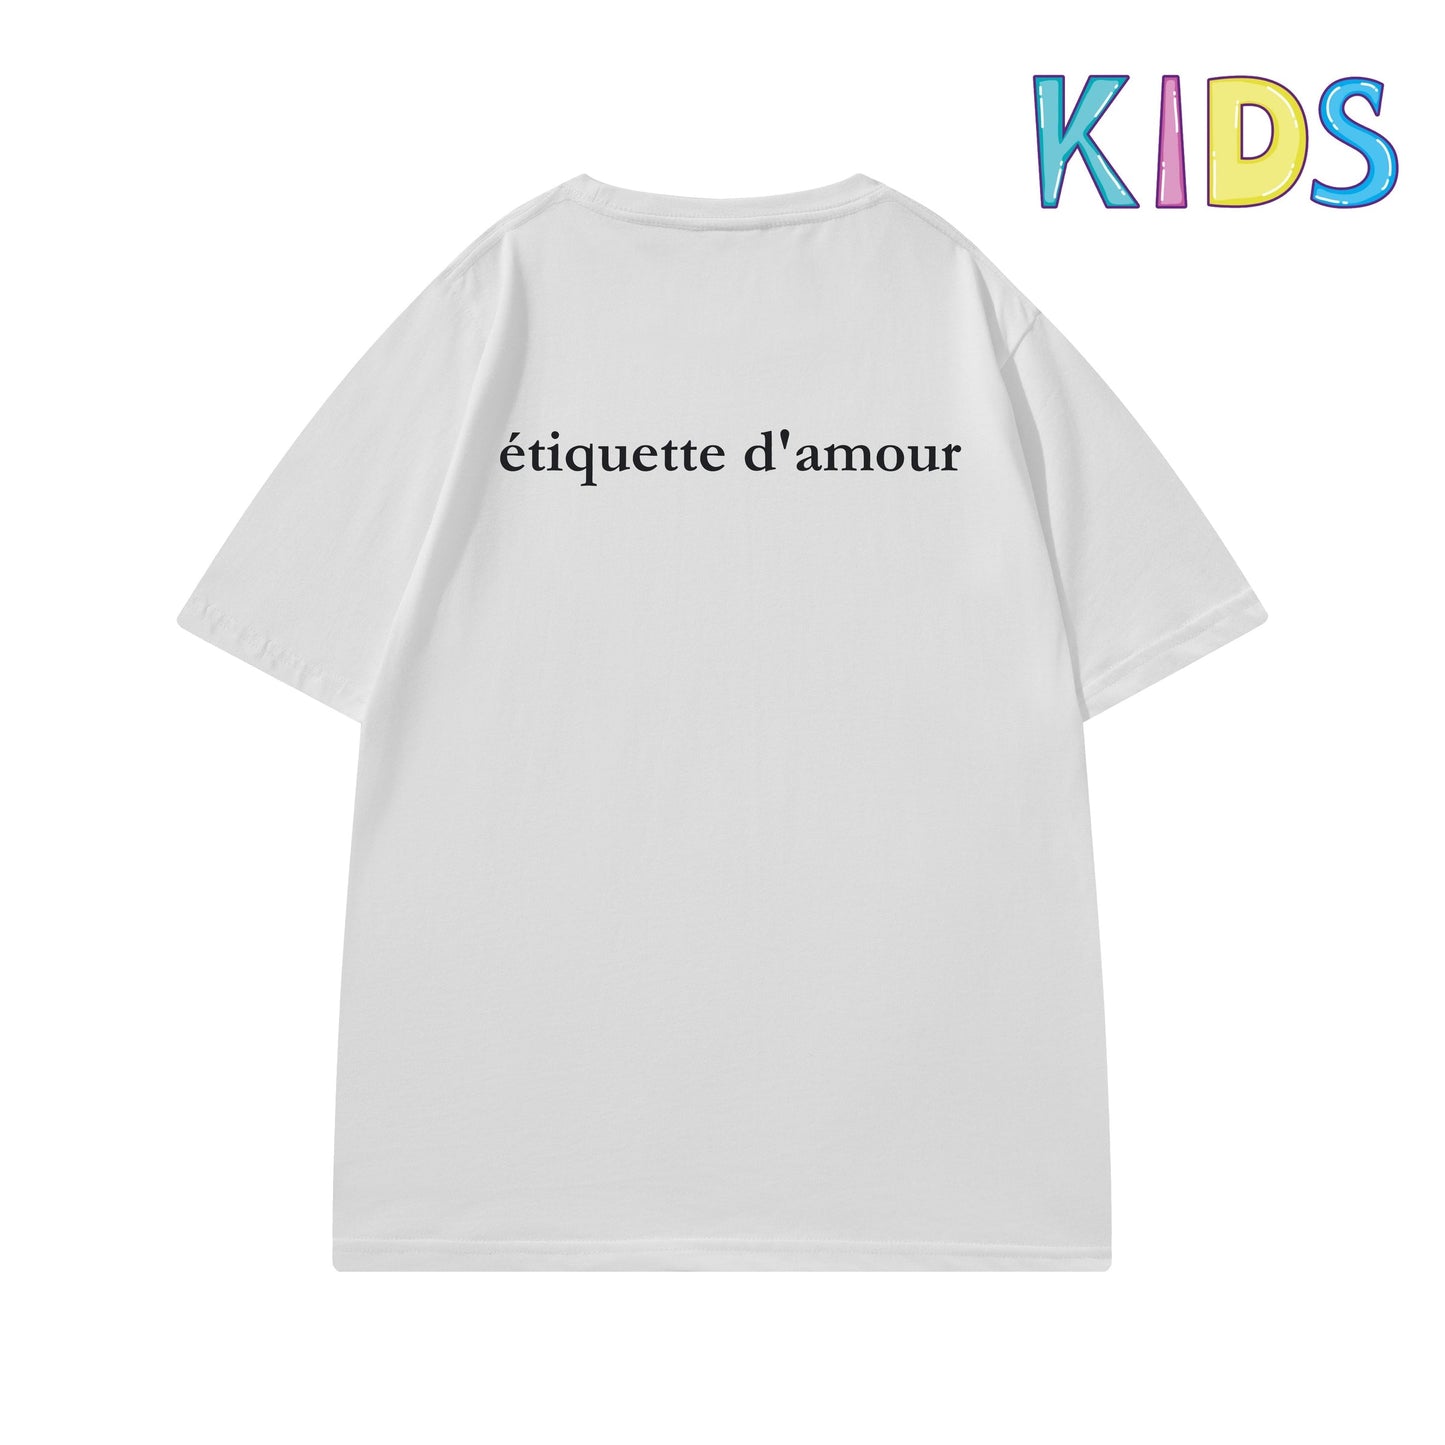 Etiquette Kids T-Shirt - [0008] Born To Be Different Teddy Bear